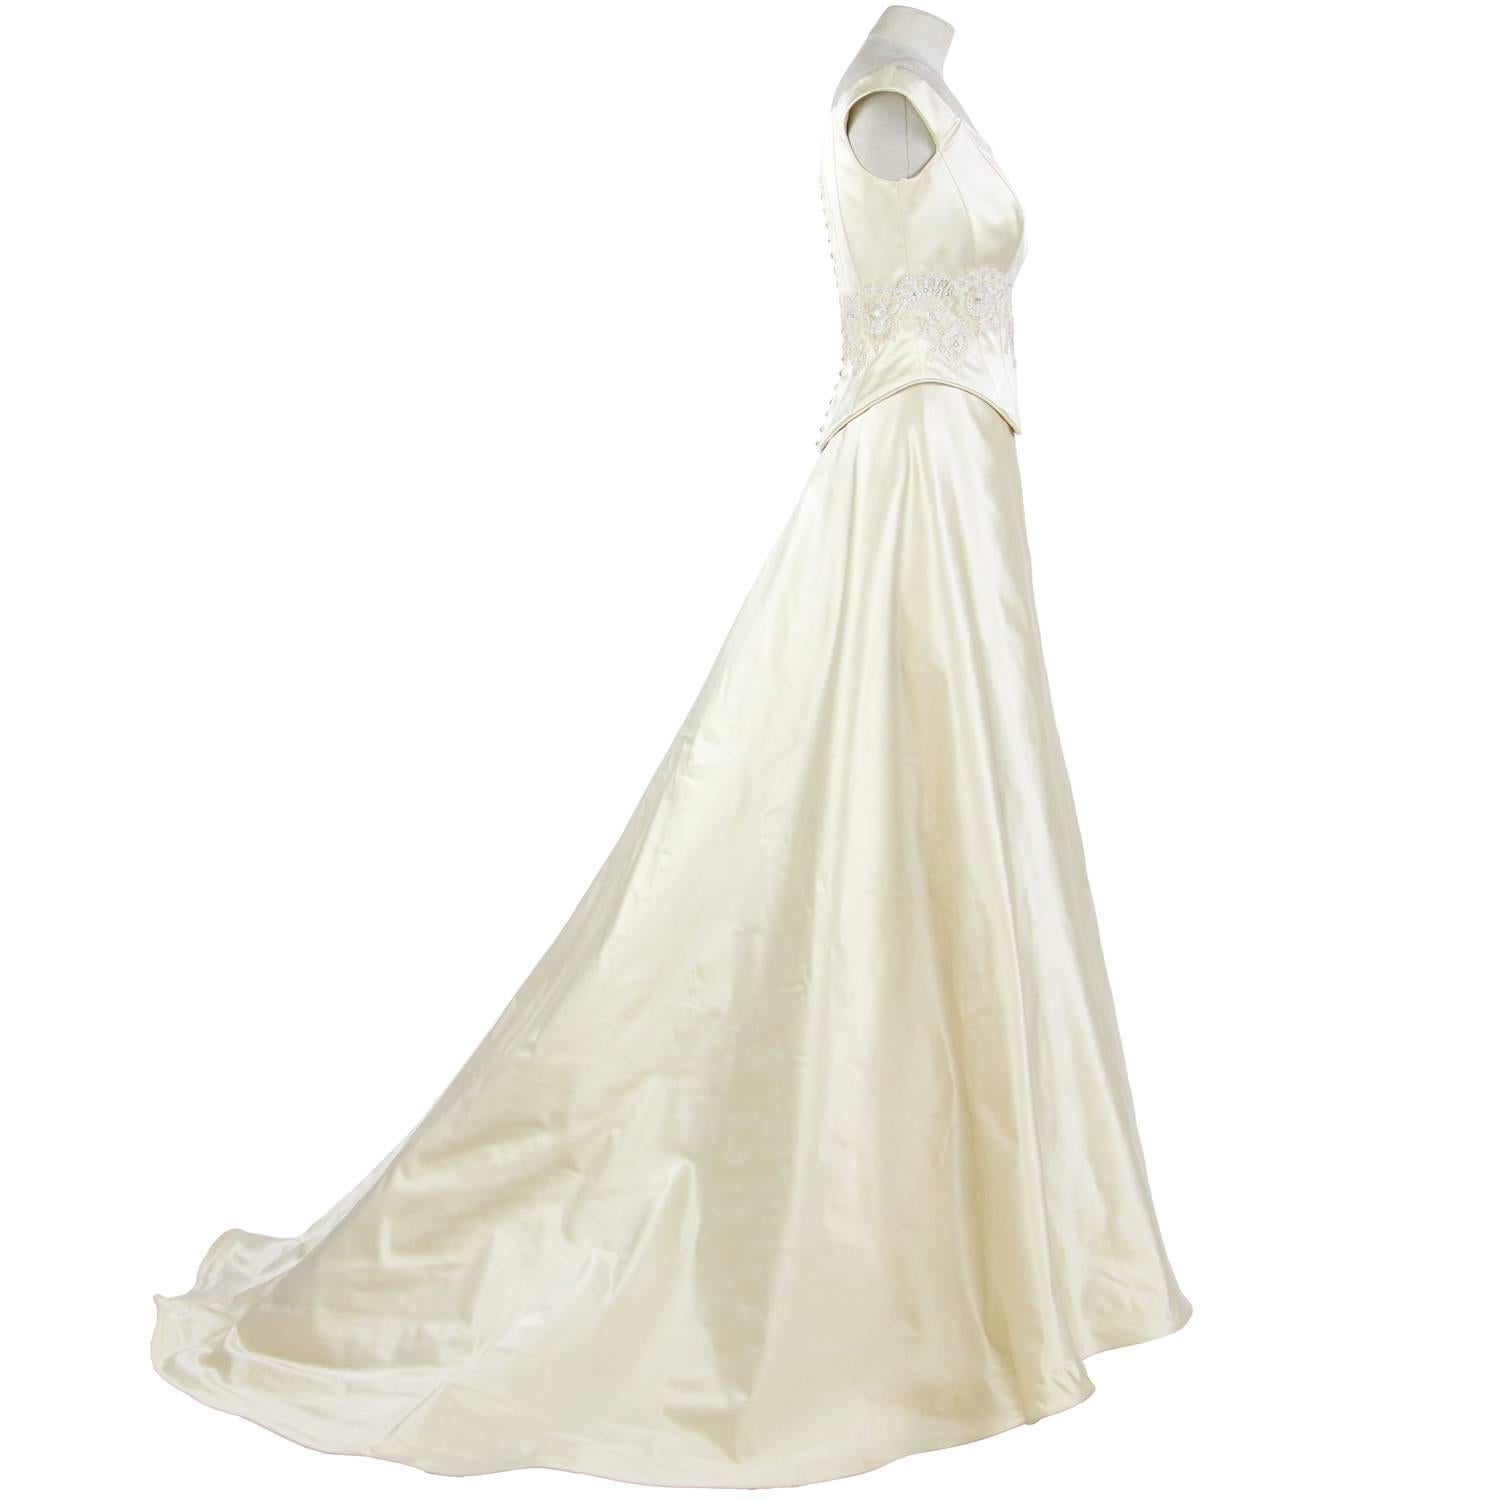 Marvelous princess dress by Atelier Aimée in ivory withe silk, from the 2000s. It features two pieces, one off-the-shoulders neckline top with slats, decorated with lace, beads and sequins, and a wide skirt with layers of tulle veil, a petticoat and